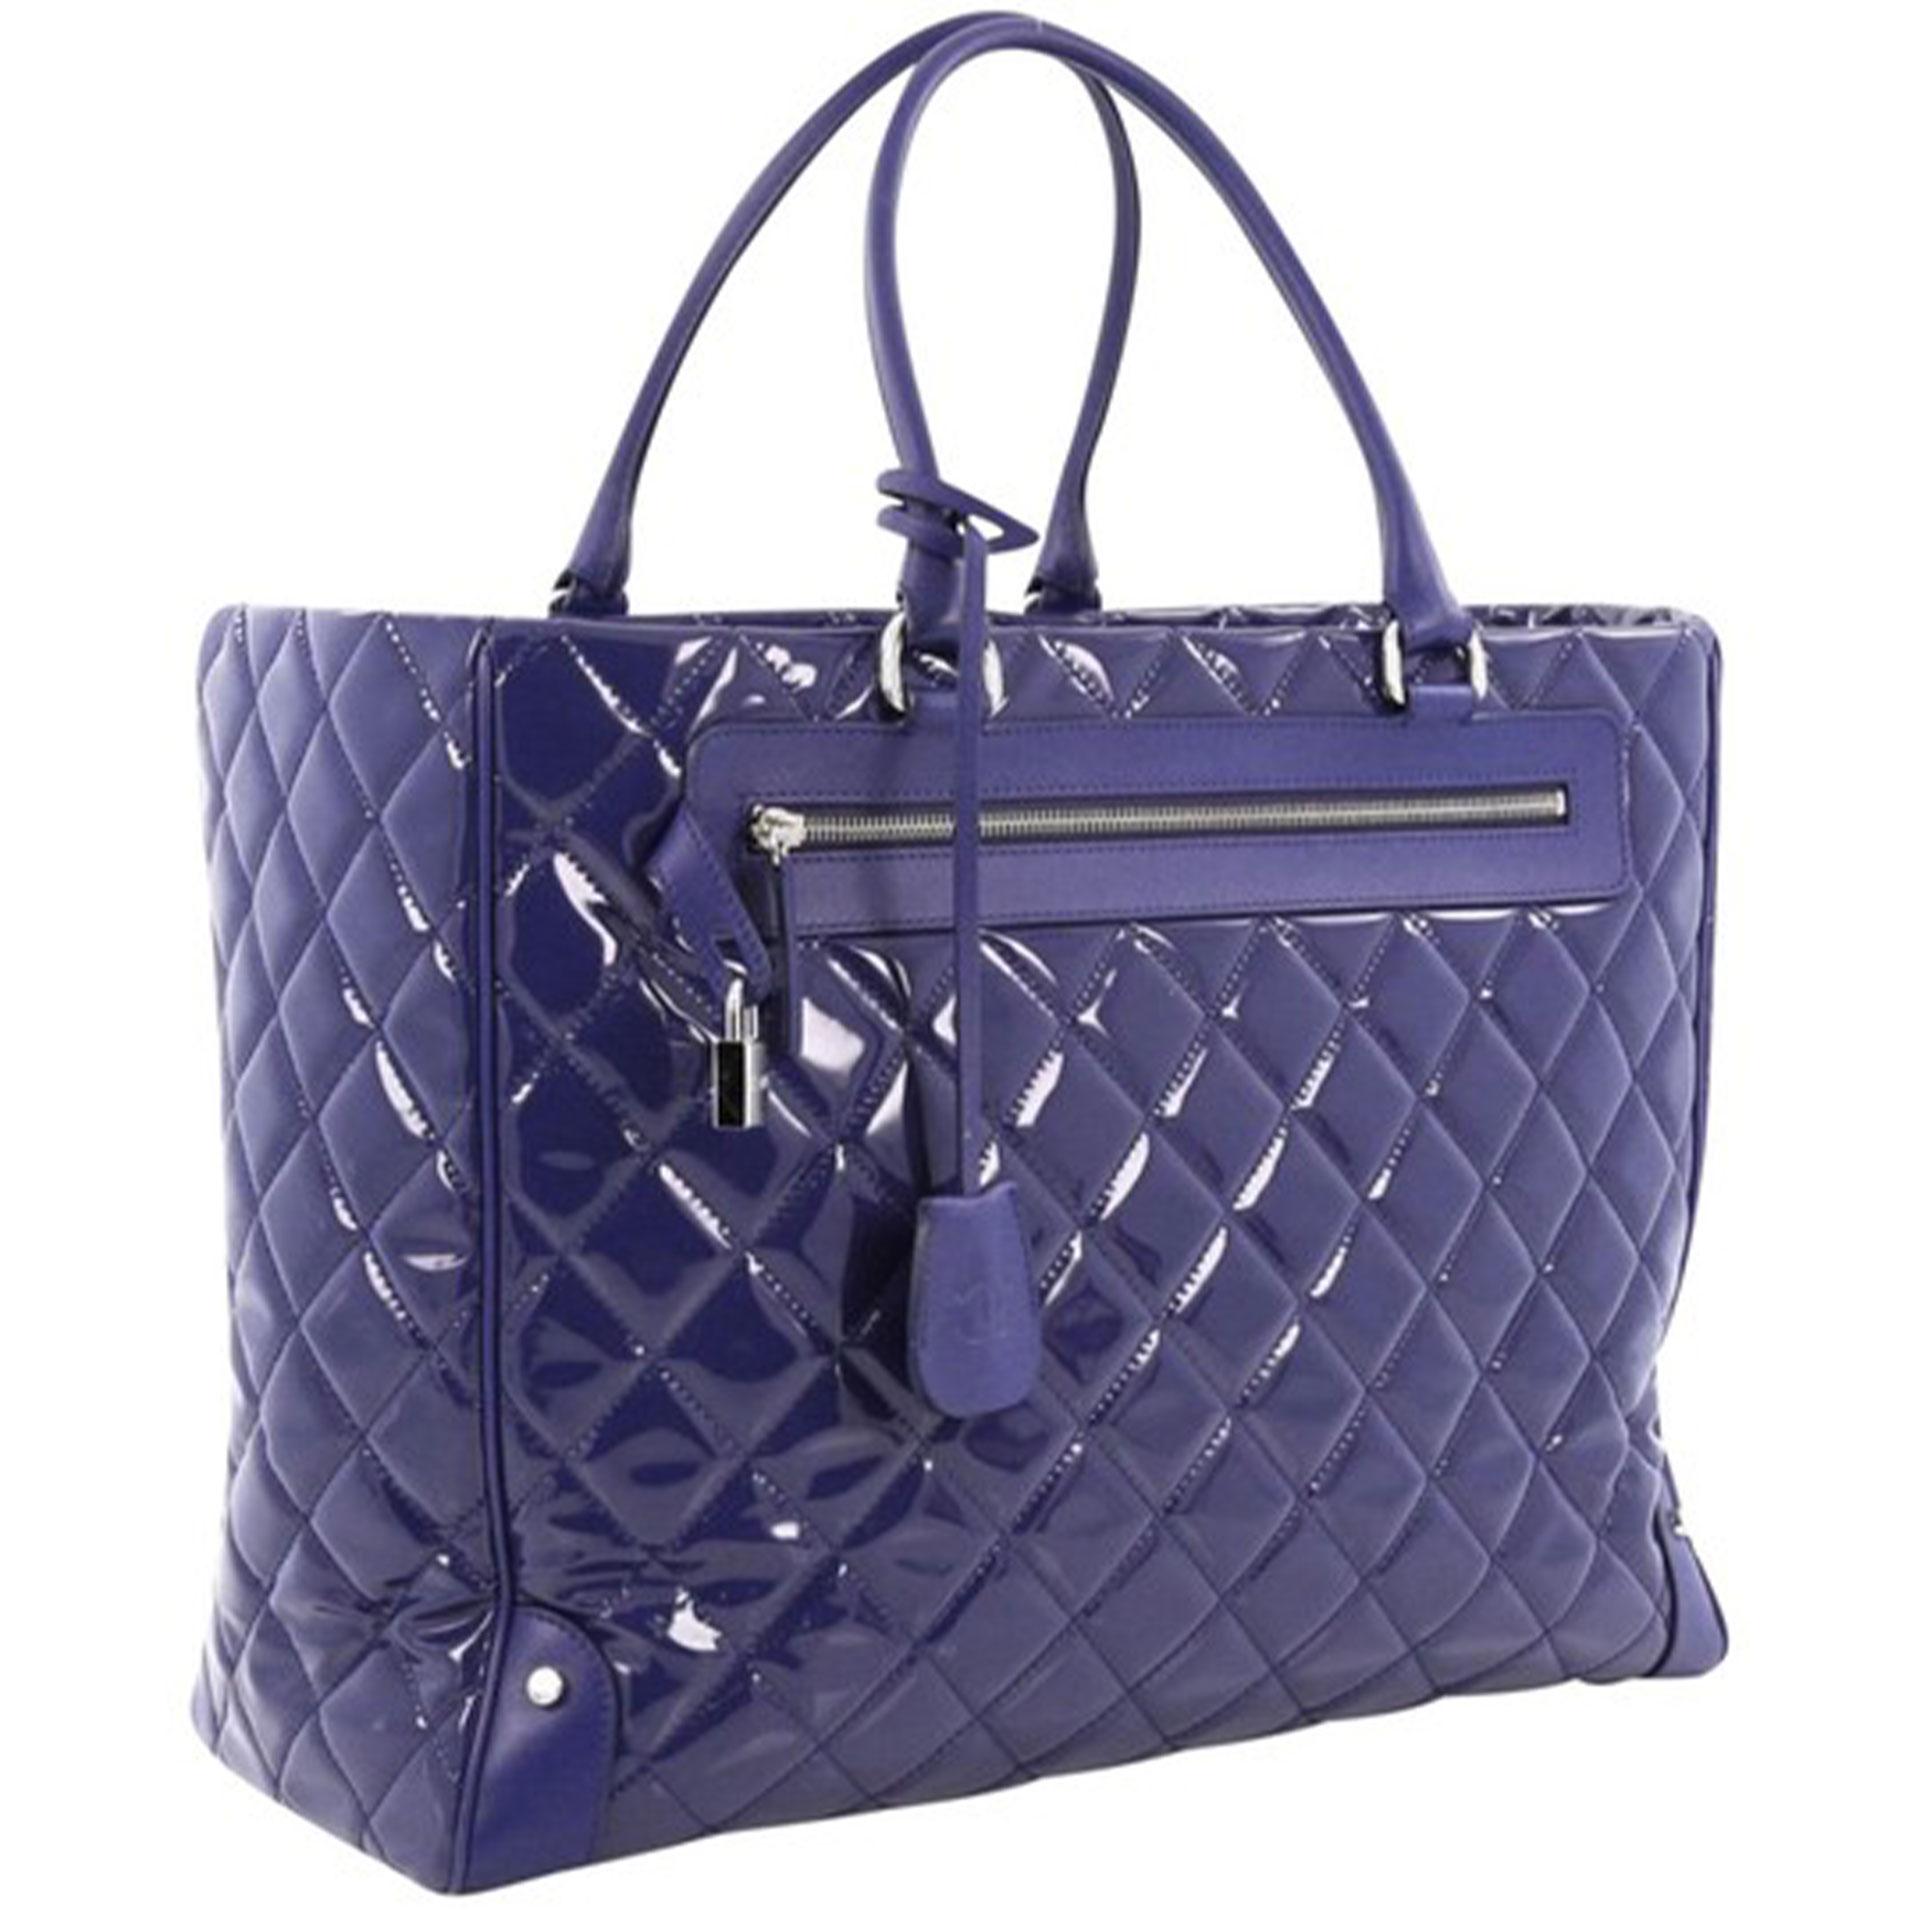 Chanel Royal Blue Patent Leather XL Quilted Carry-On Travel Bag Tote 

Spring/Summer 2015 
Silver hardware
Royal blue patent leather
Royal blue calfskin leather trims
Dual-rolled leather handles
Exterior zip pocket with a padlock and a hanging